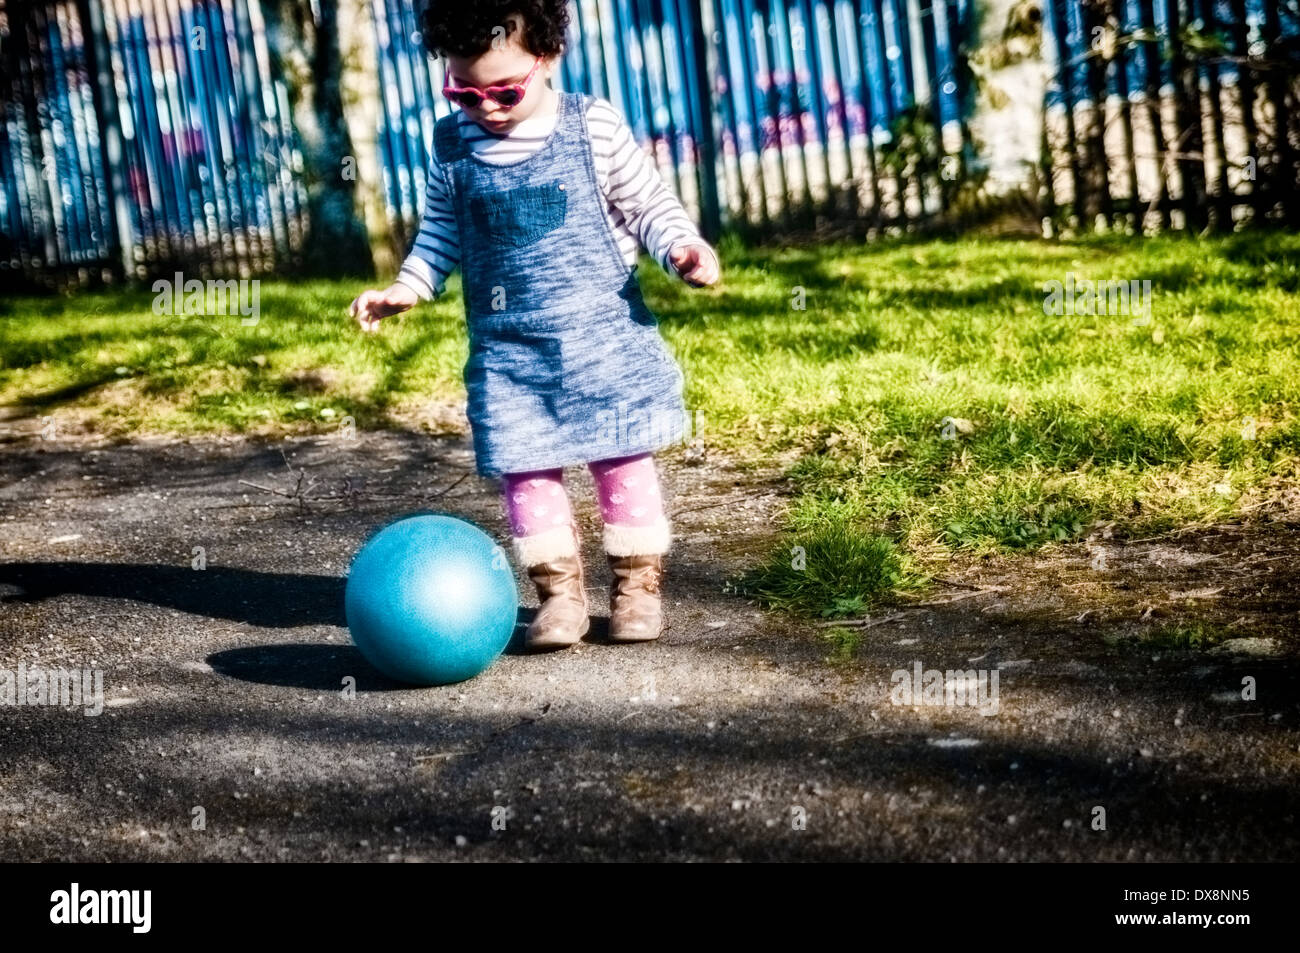 Toddler, 2-3 years old, is playing with Plastic Ball in Park Stock Photo